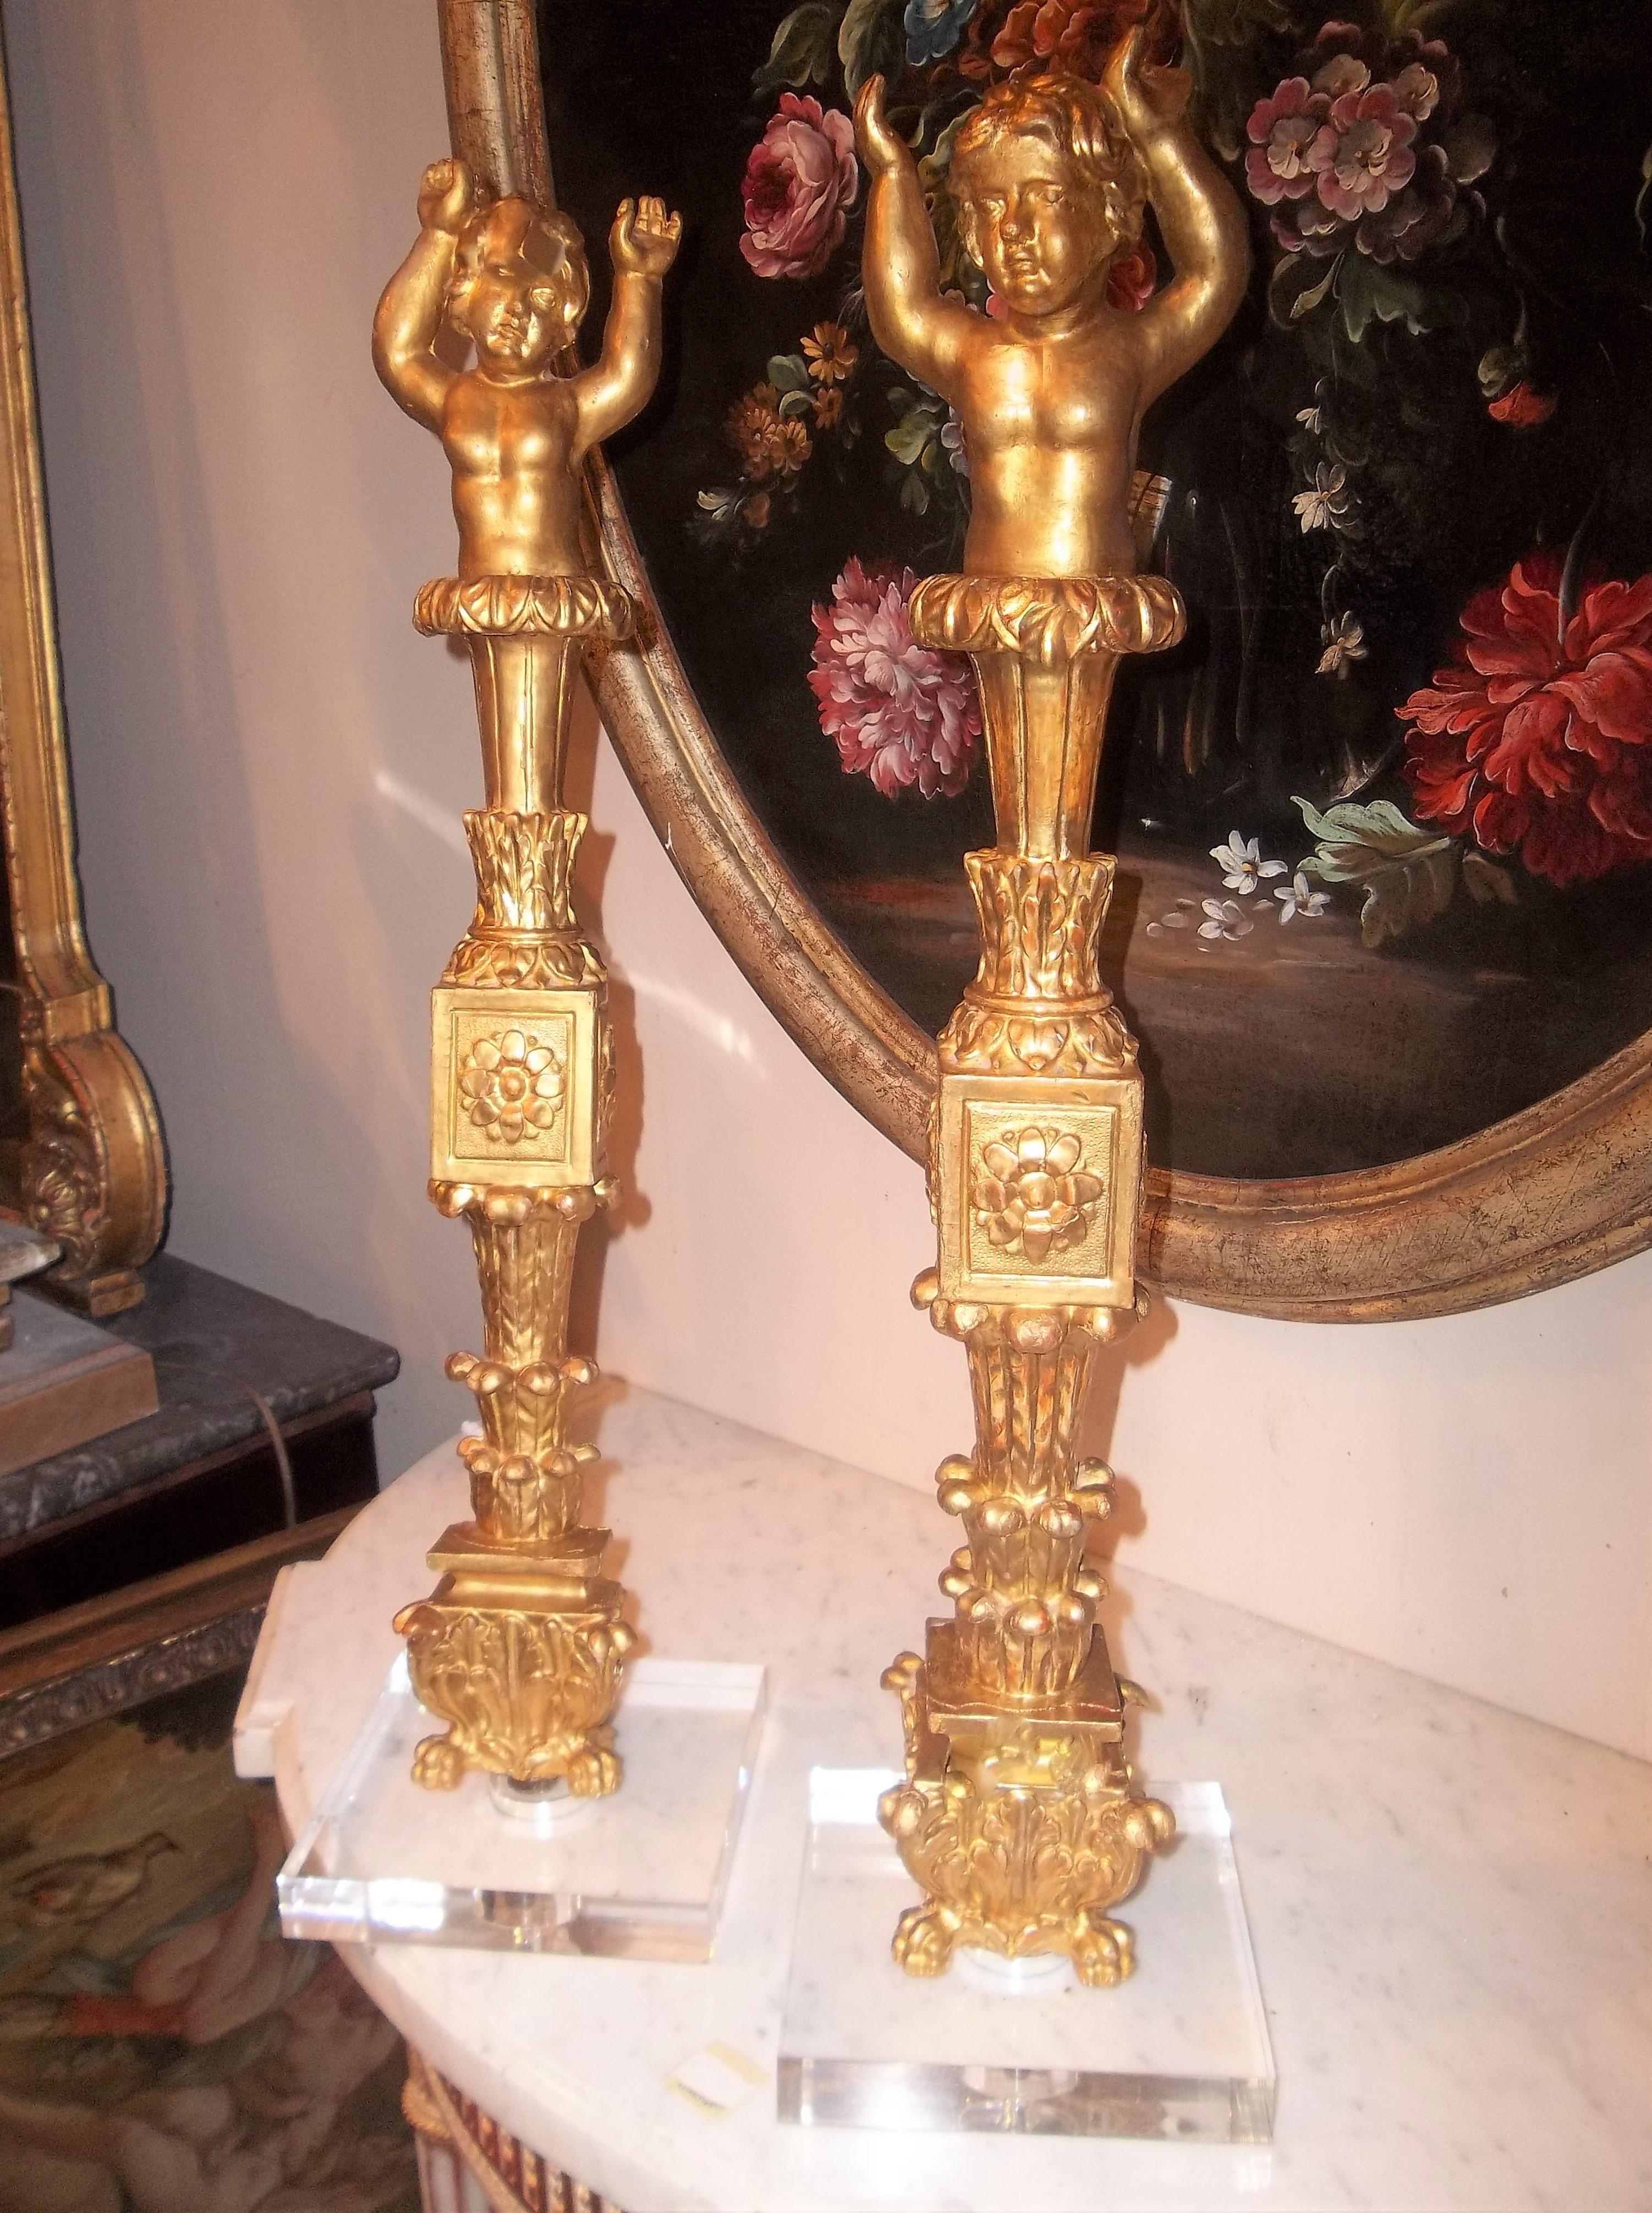 On acrylic bases (6 inch square). Gilt and water gilt, cherubs on top of neoclassical stylized columns. 

Either cut off a cabinet or boiserie (panelling), the hands in upward support, flat pilaster type back. The bases pre-drilled for lamp wirings